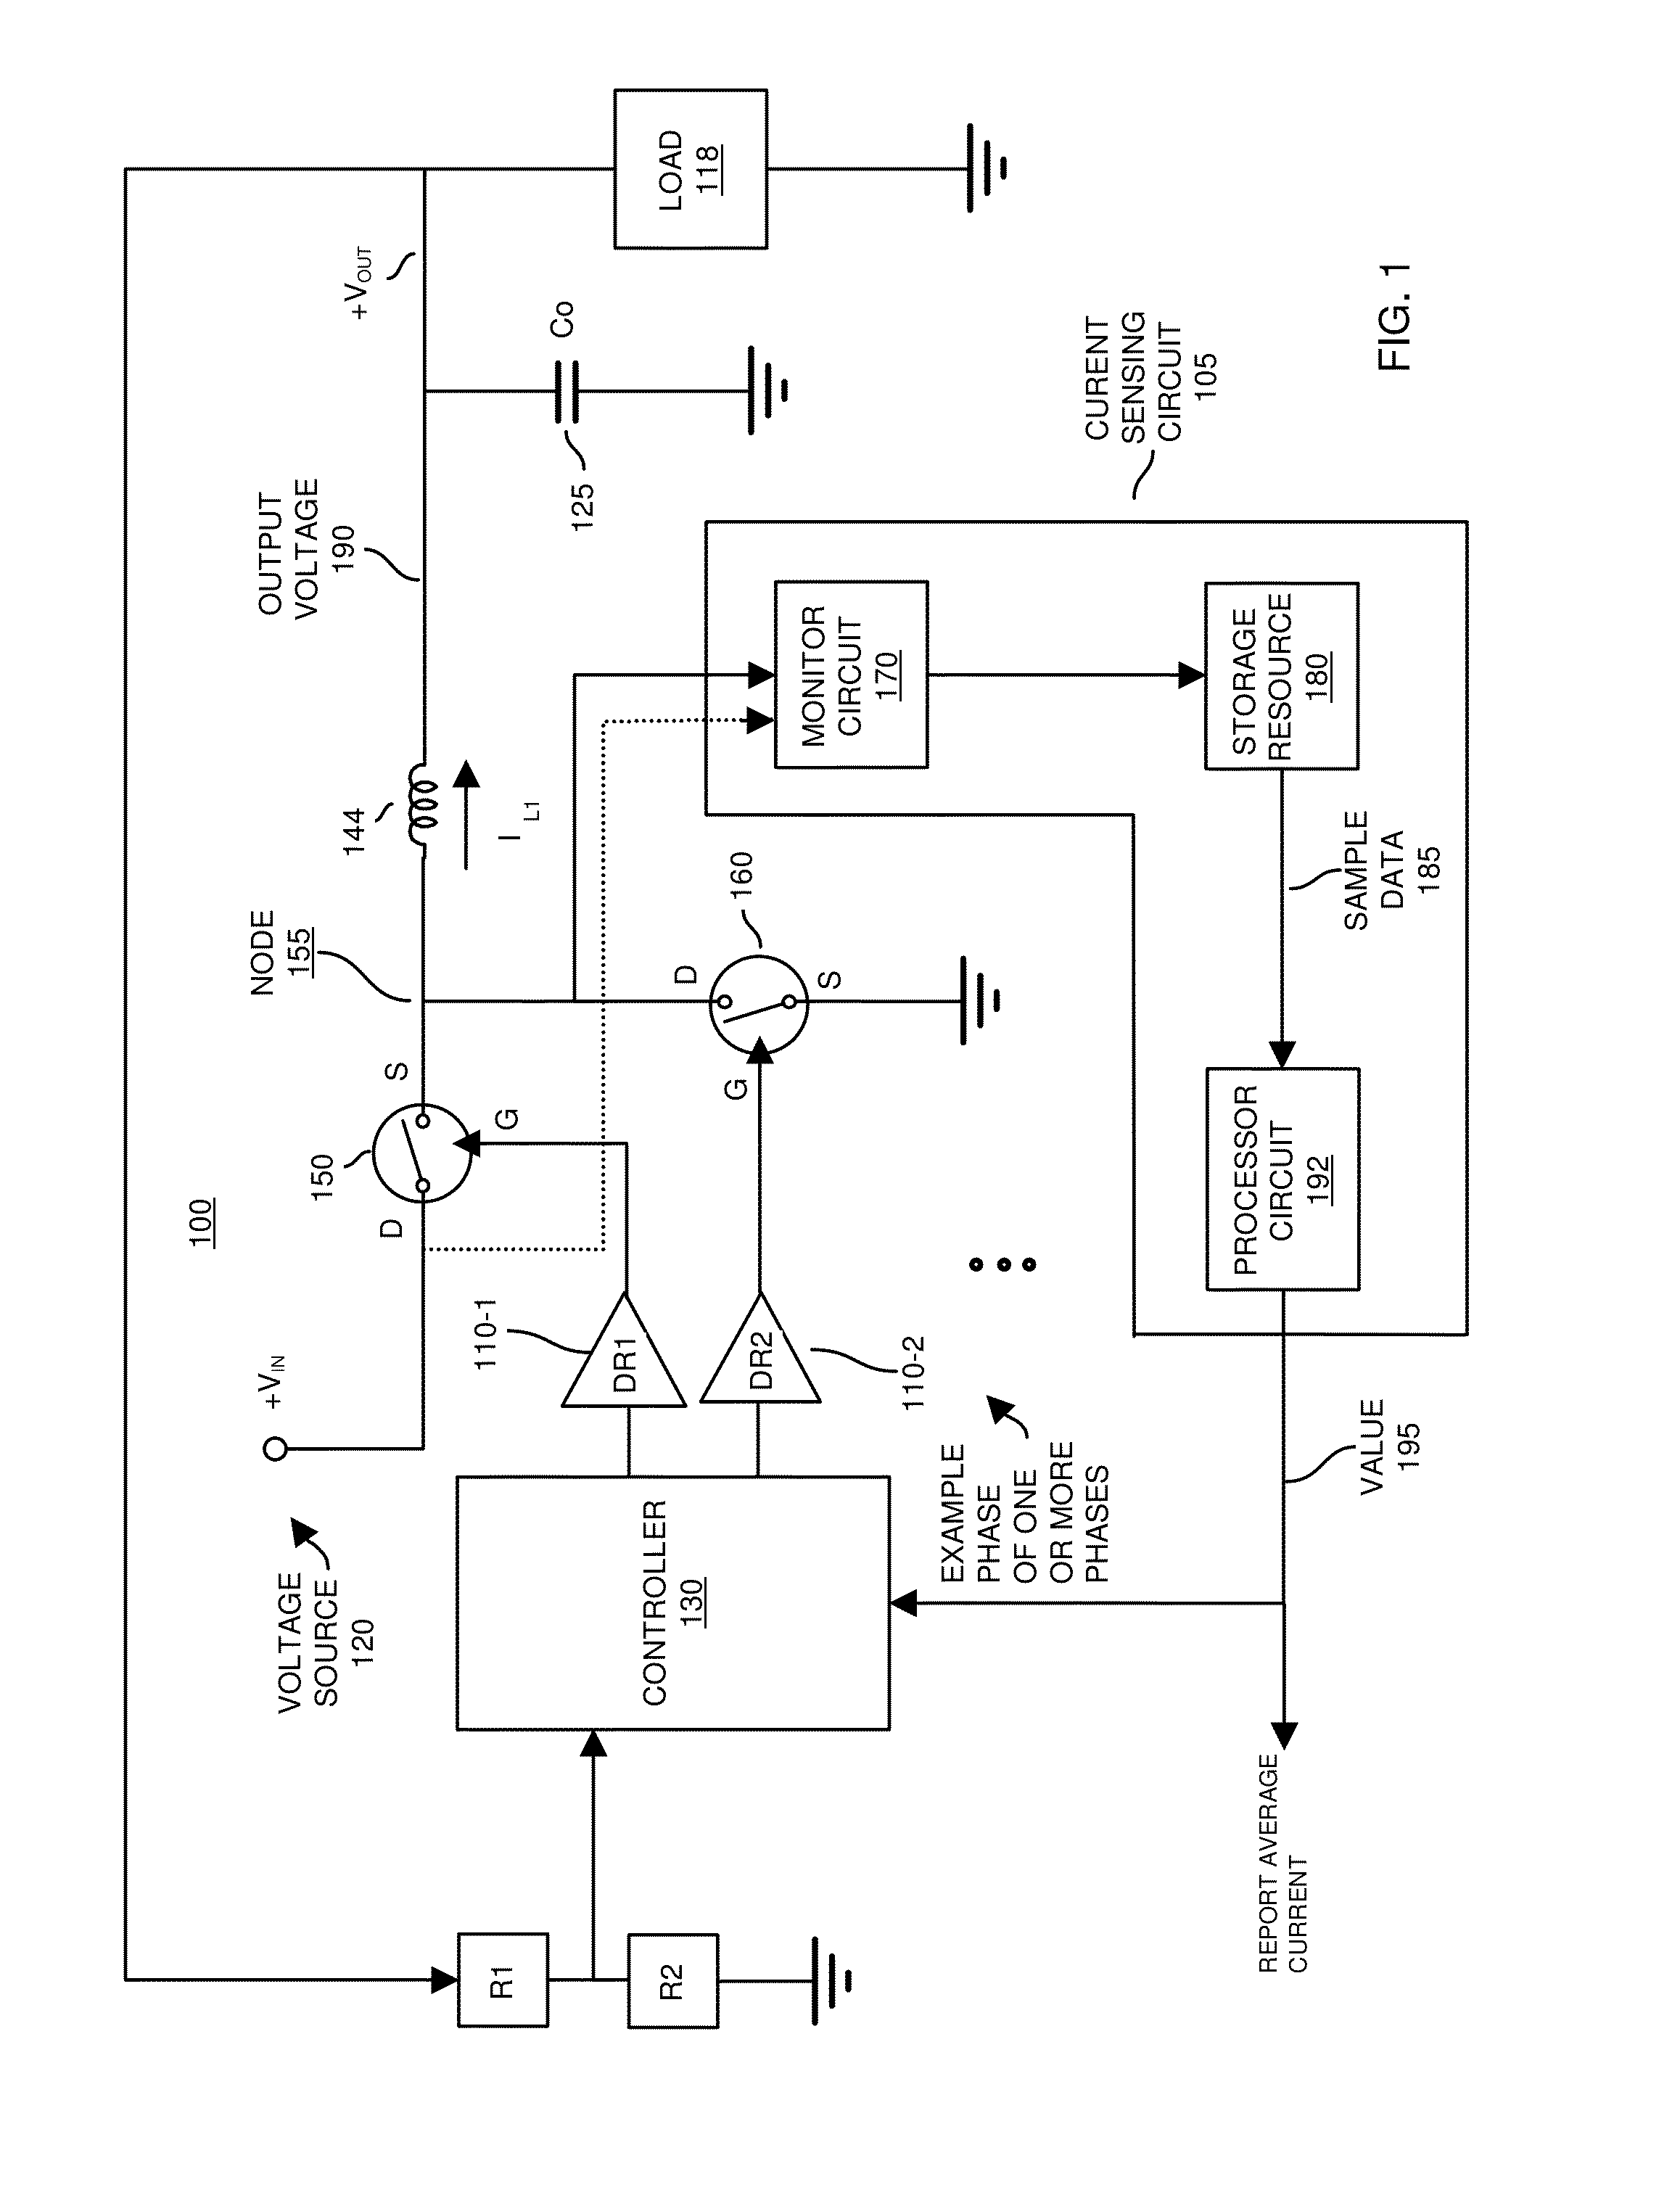 Power supply circuitry and current measurement